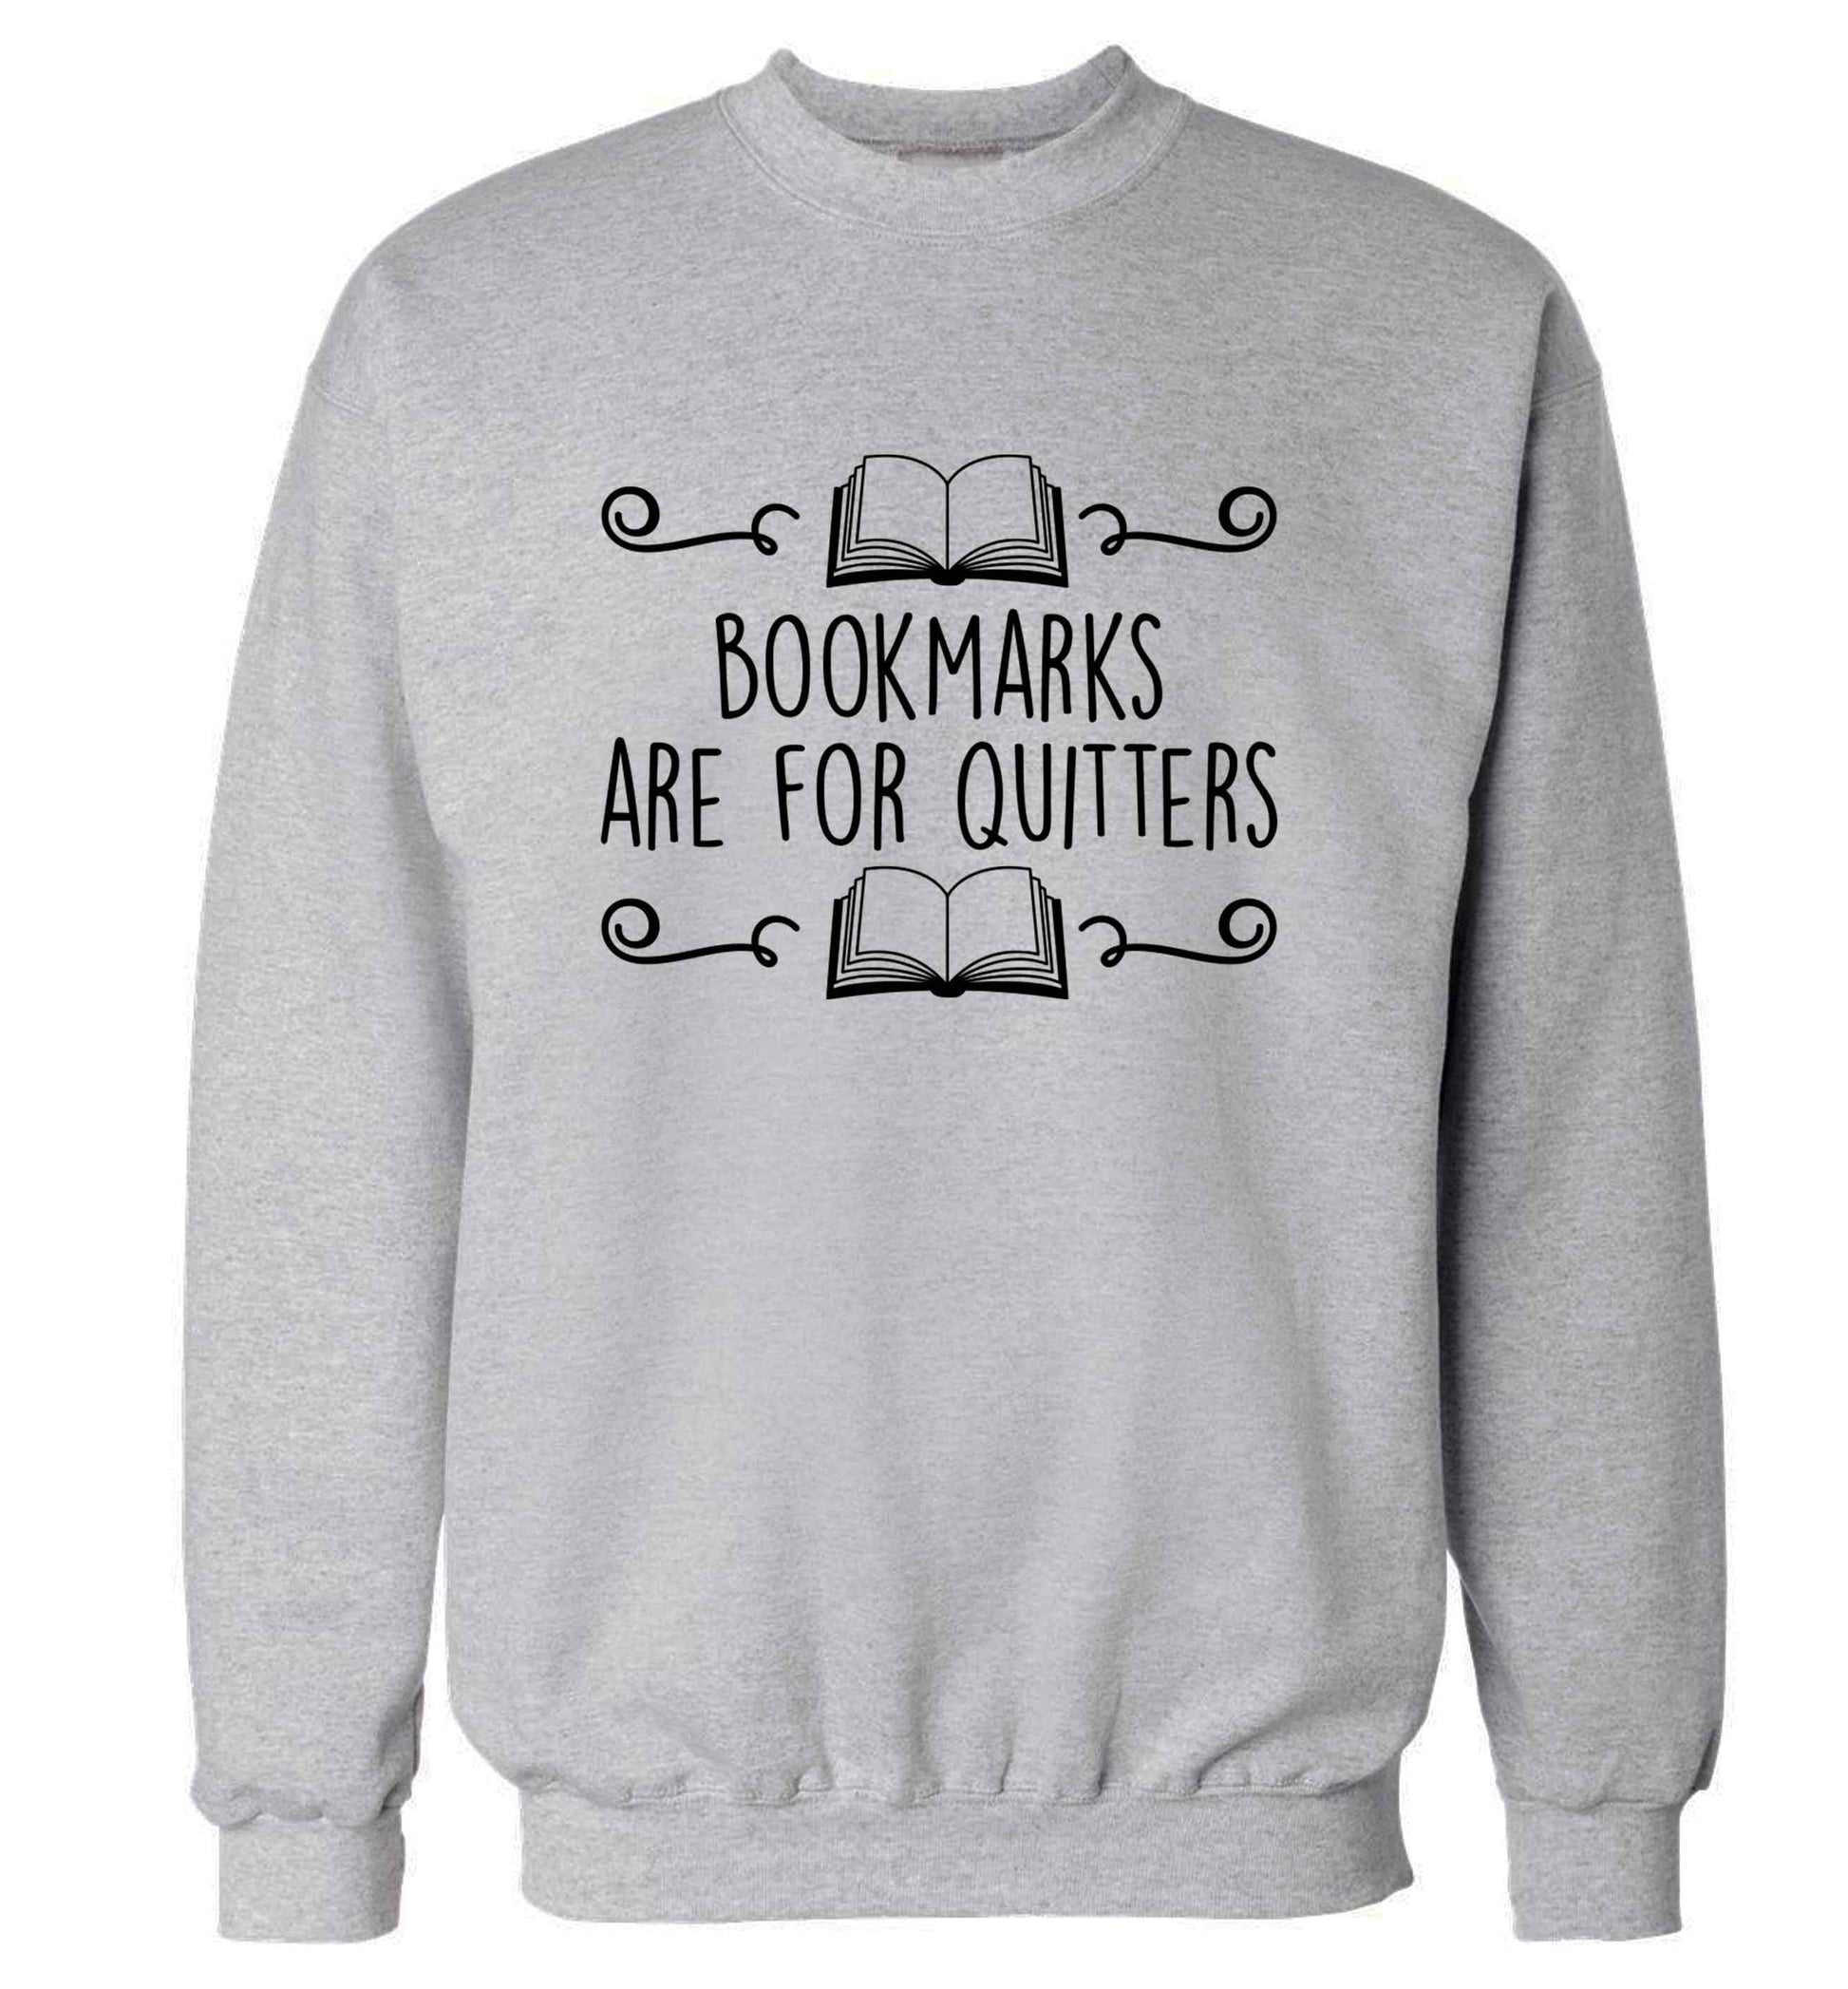 Bookmarks are for quitters adult's unisex grey sweater 2XL